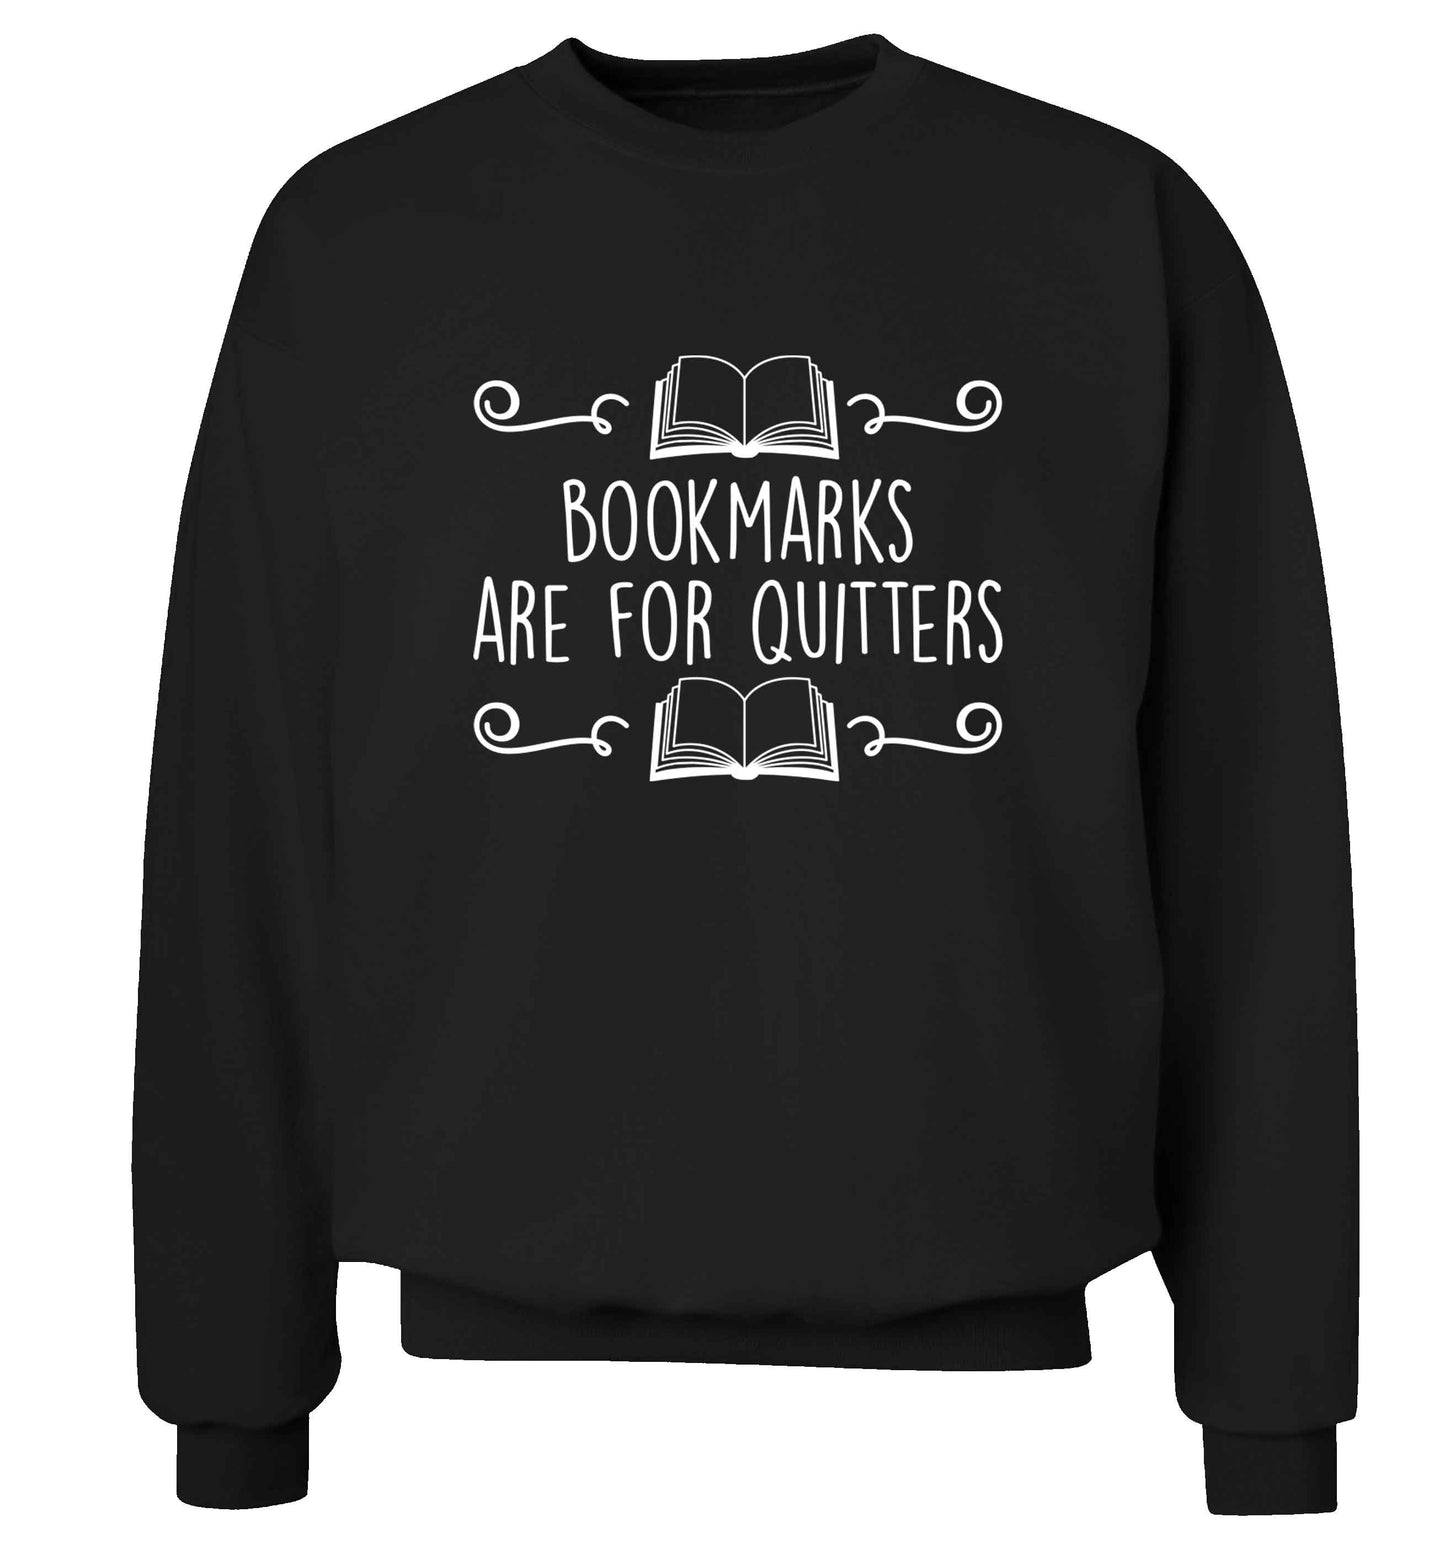 Bookmarks are for quitters adult's unisex black sweater 2XL